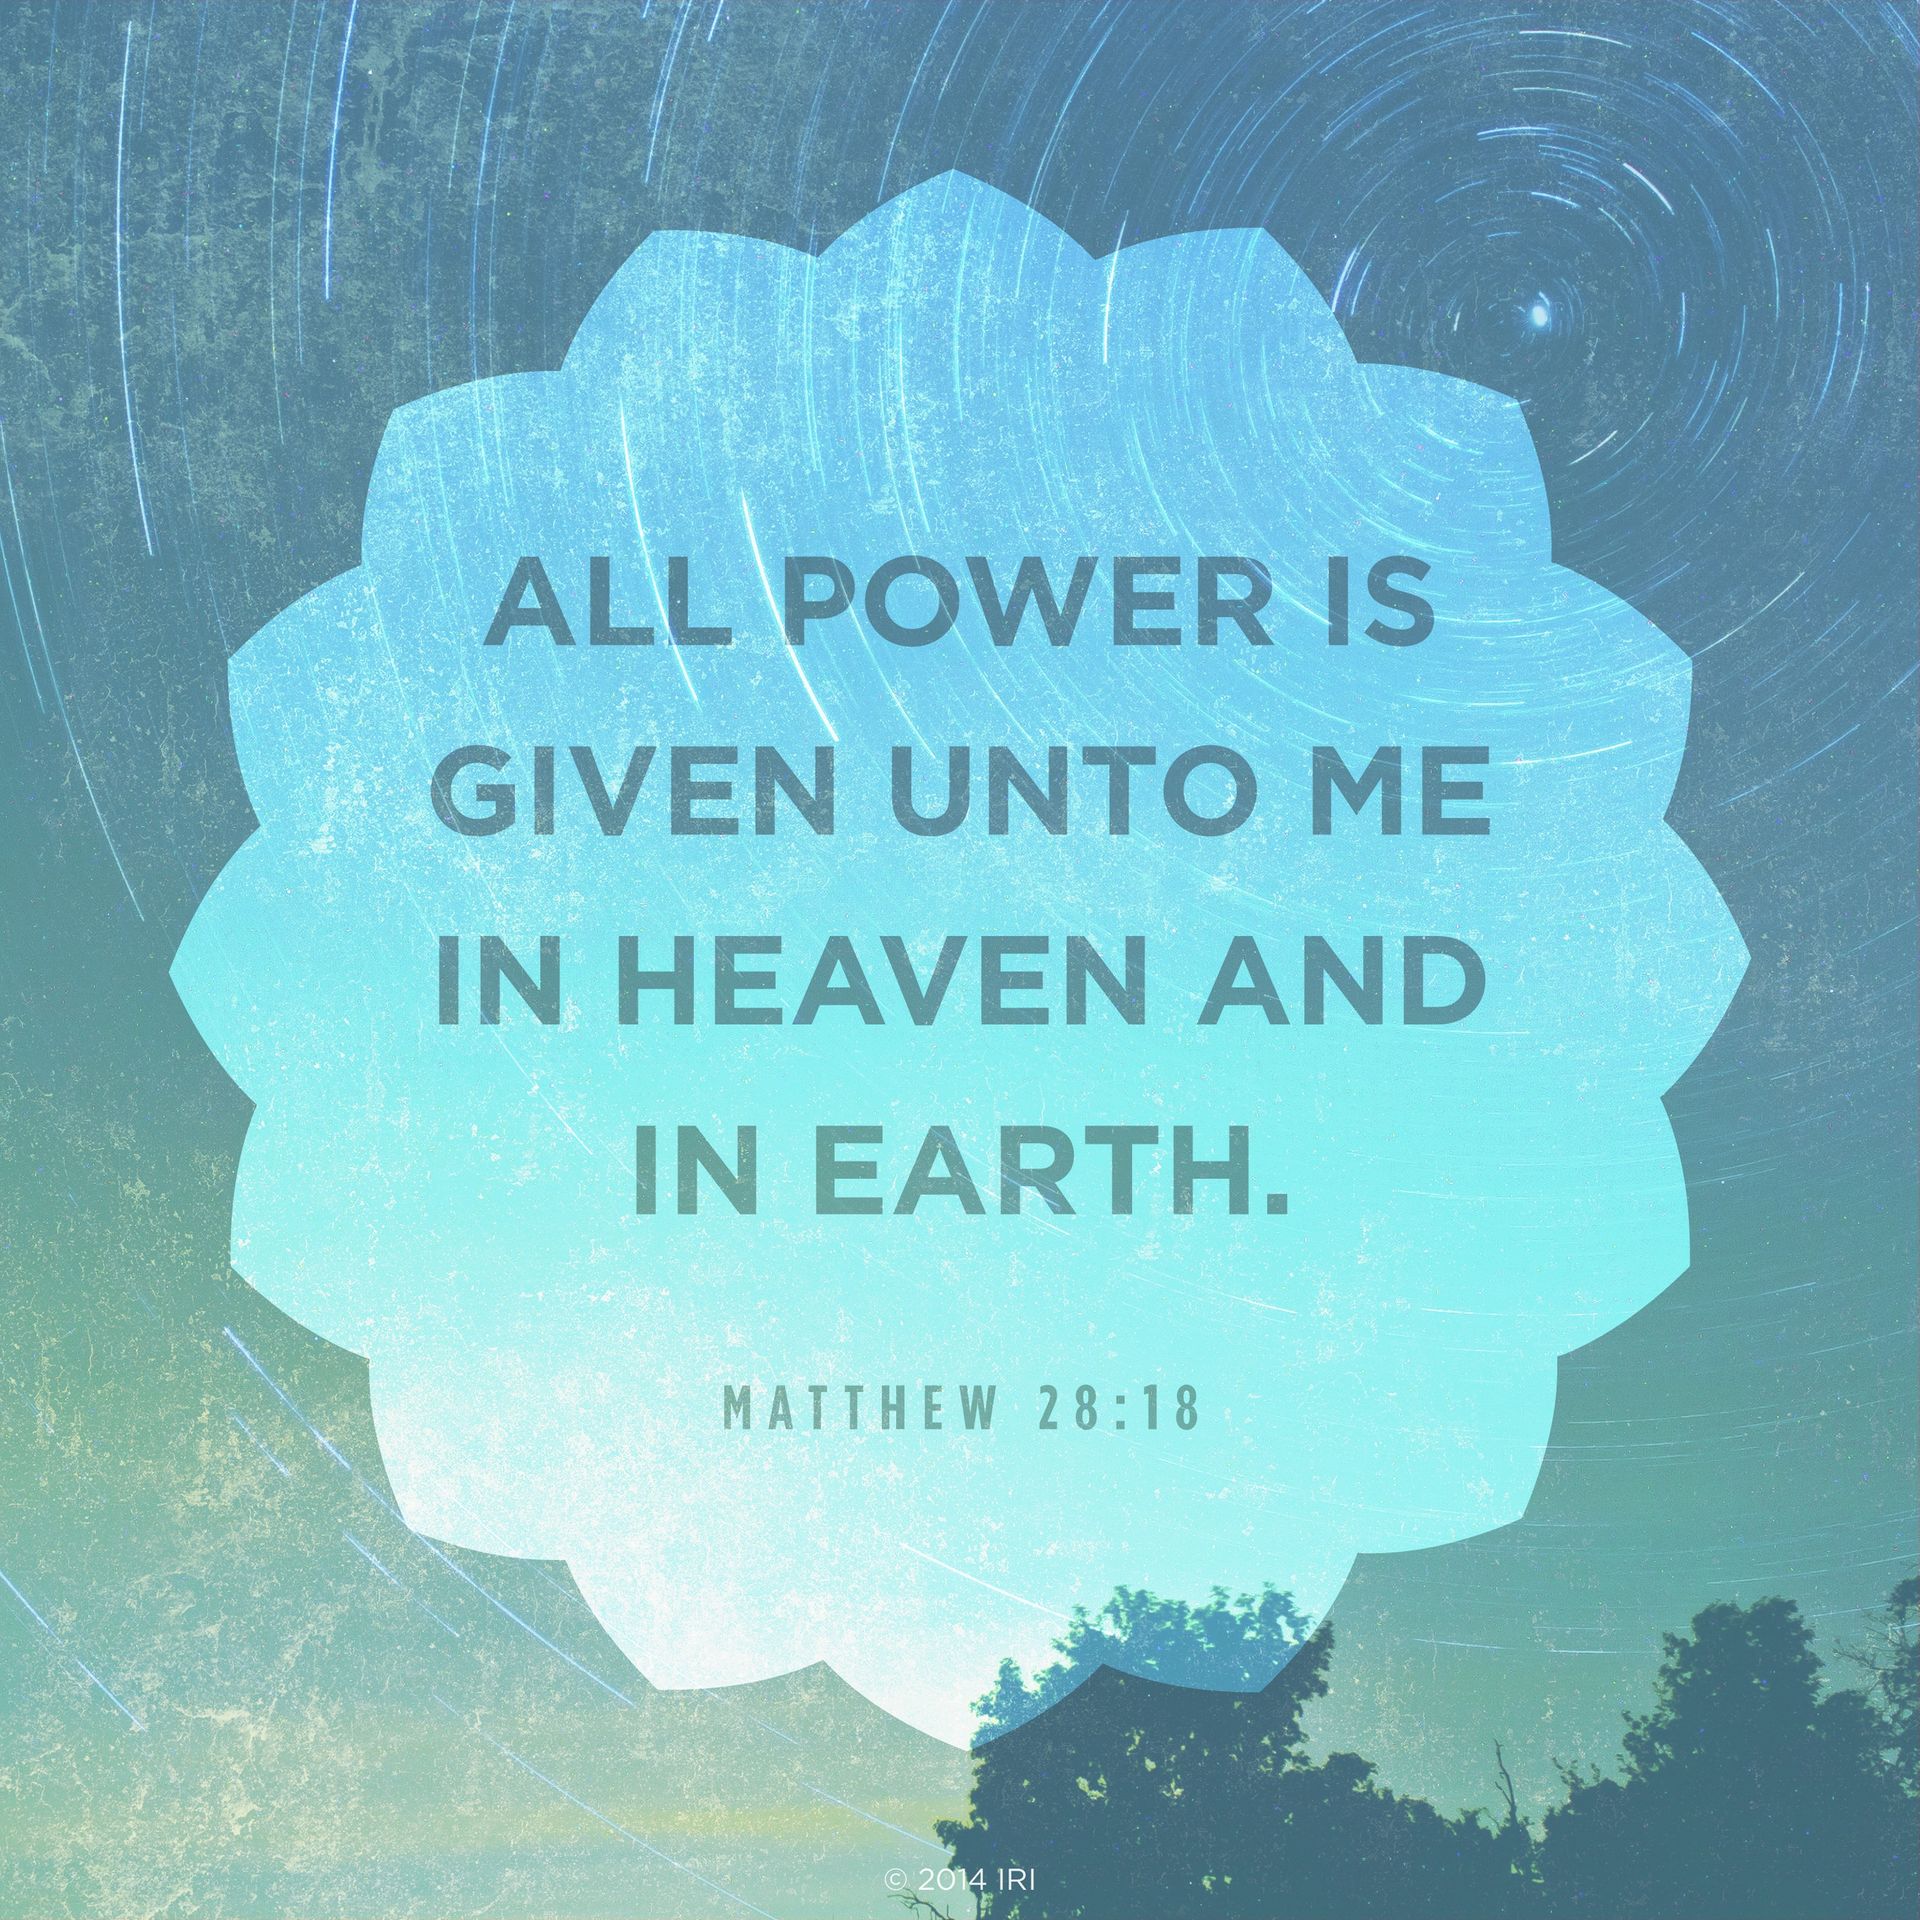 “All power is given unto me in heaven and in earth.”—Matthew 28:18